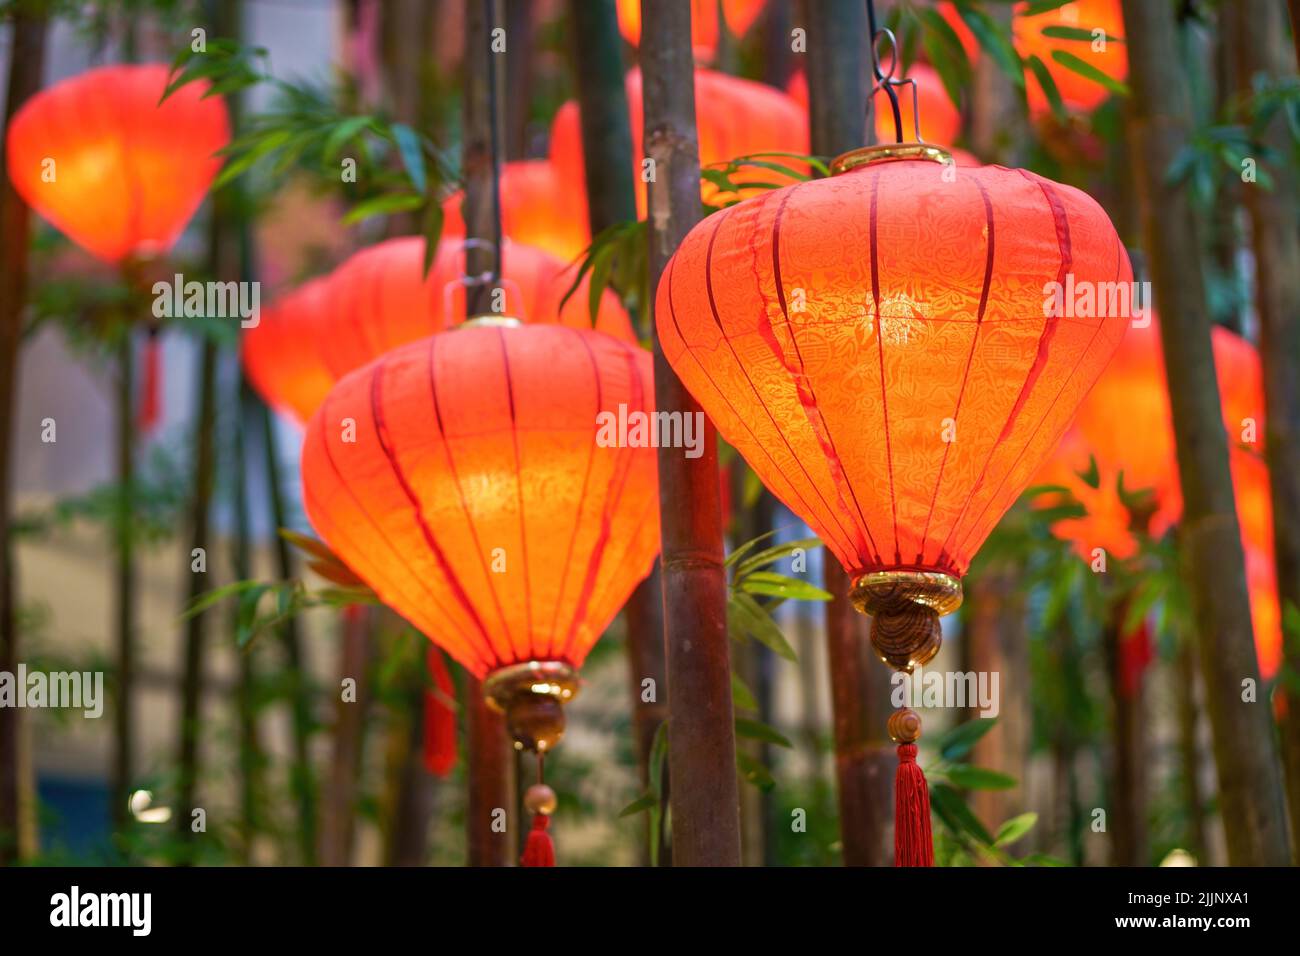 A close-up shot of Chinese red lanterns hanging on the bamboo plants. Stock Photo